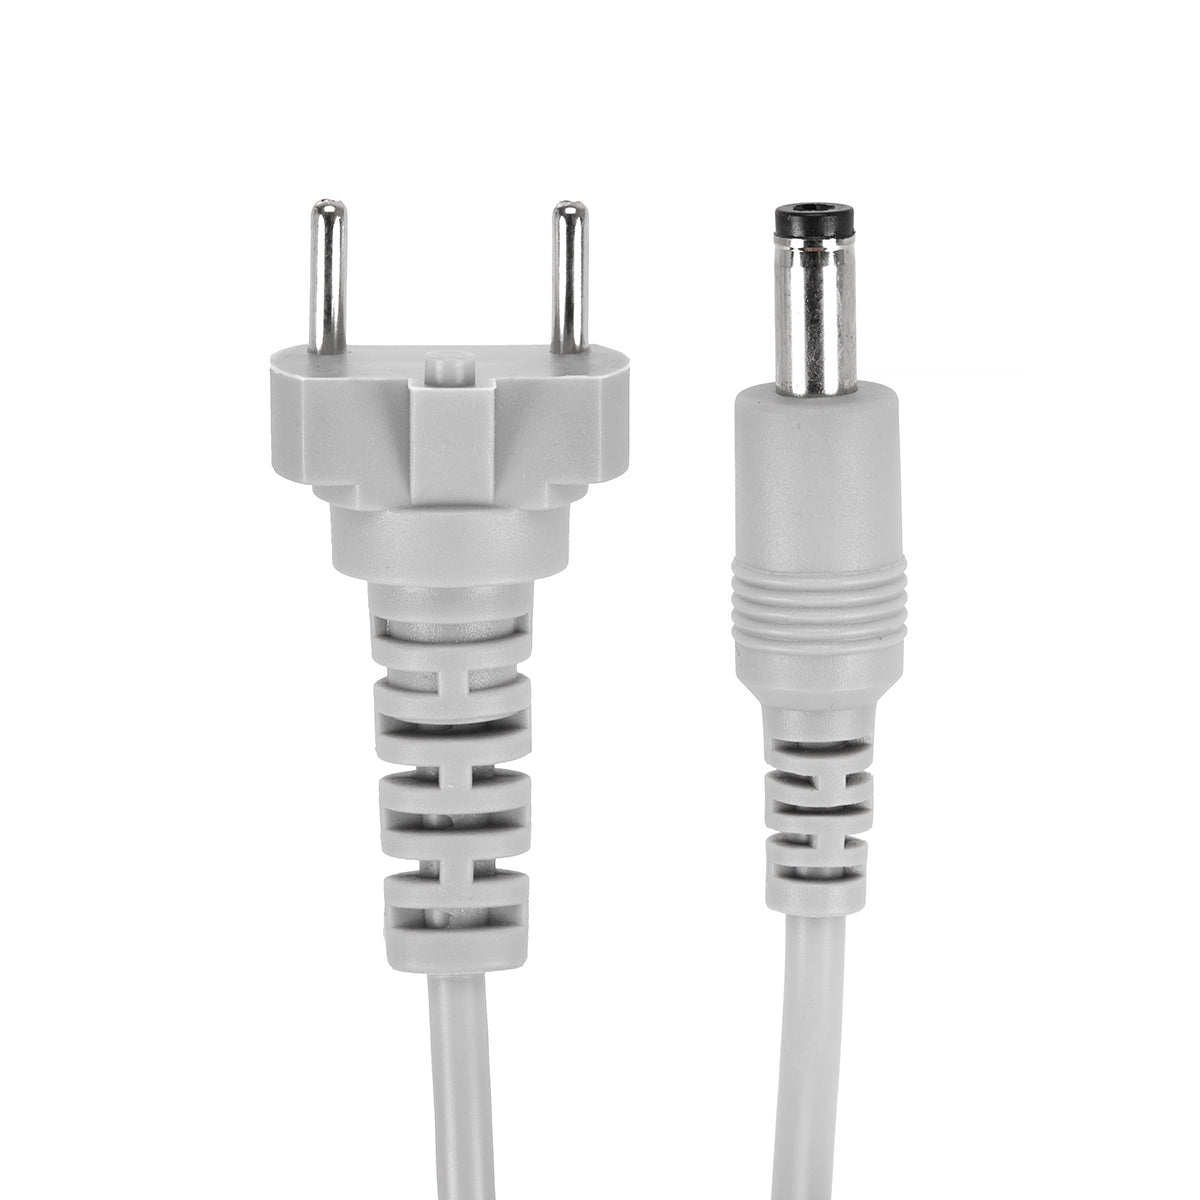 Saeyang cable from the bright Marathon SH-300 to the frequency of the K38 Crafien mini